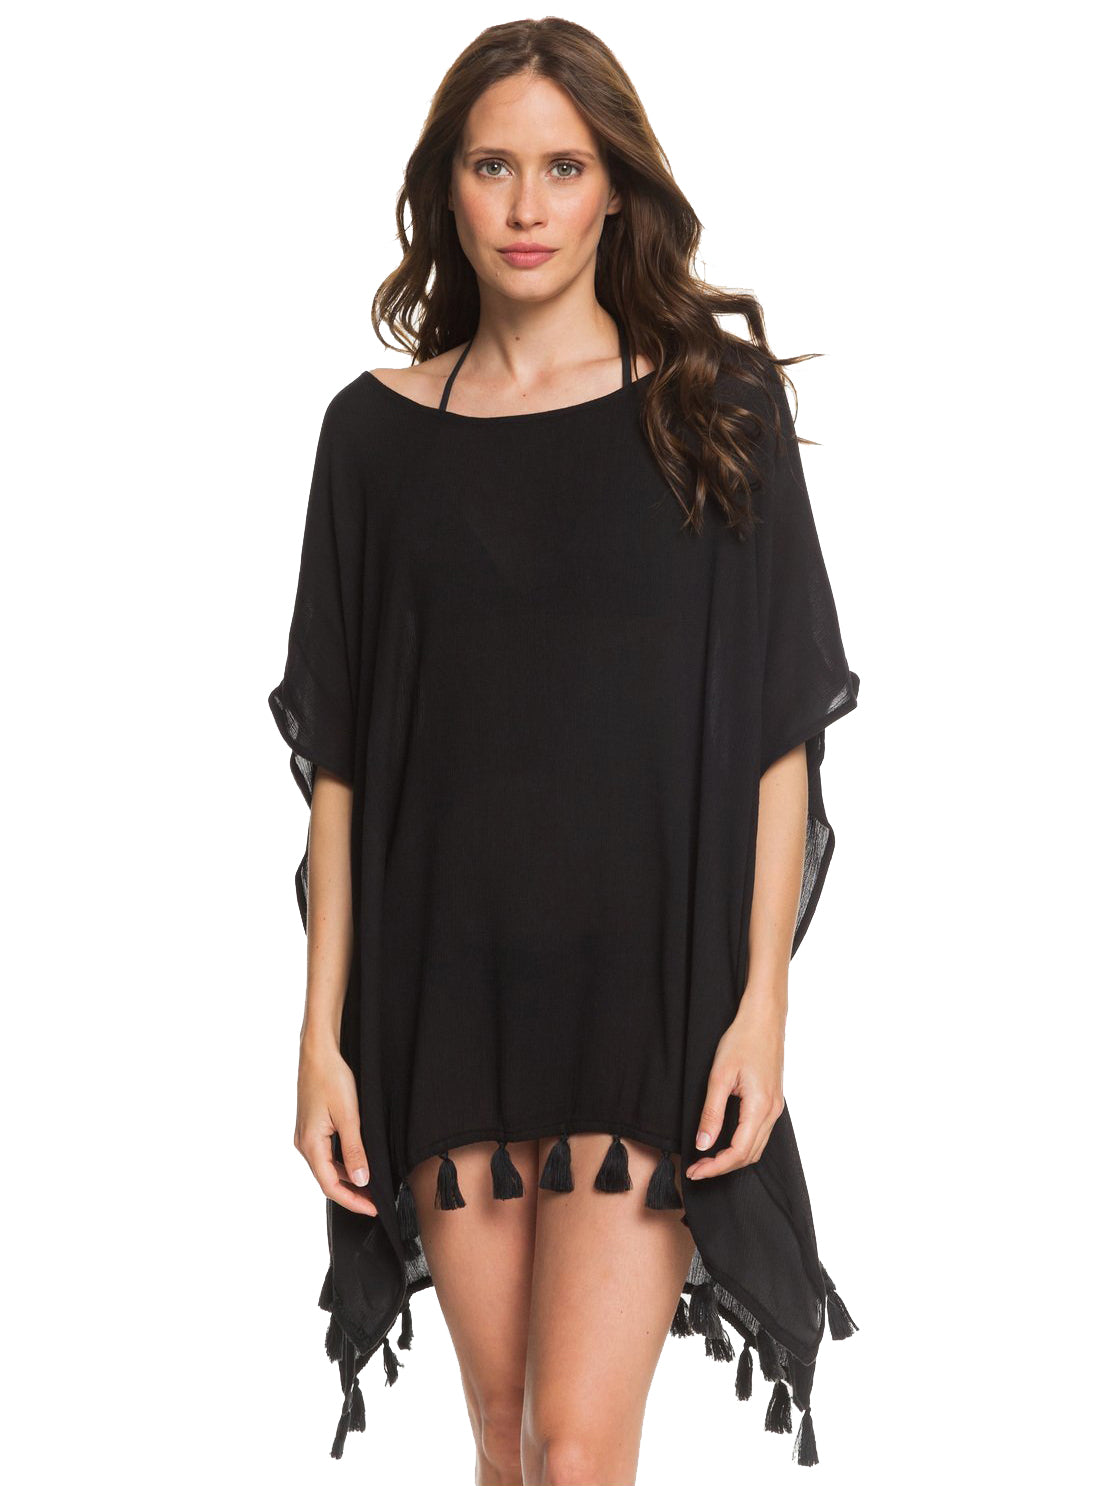 Roxy Make Your Soul Beach Cover-Up